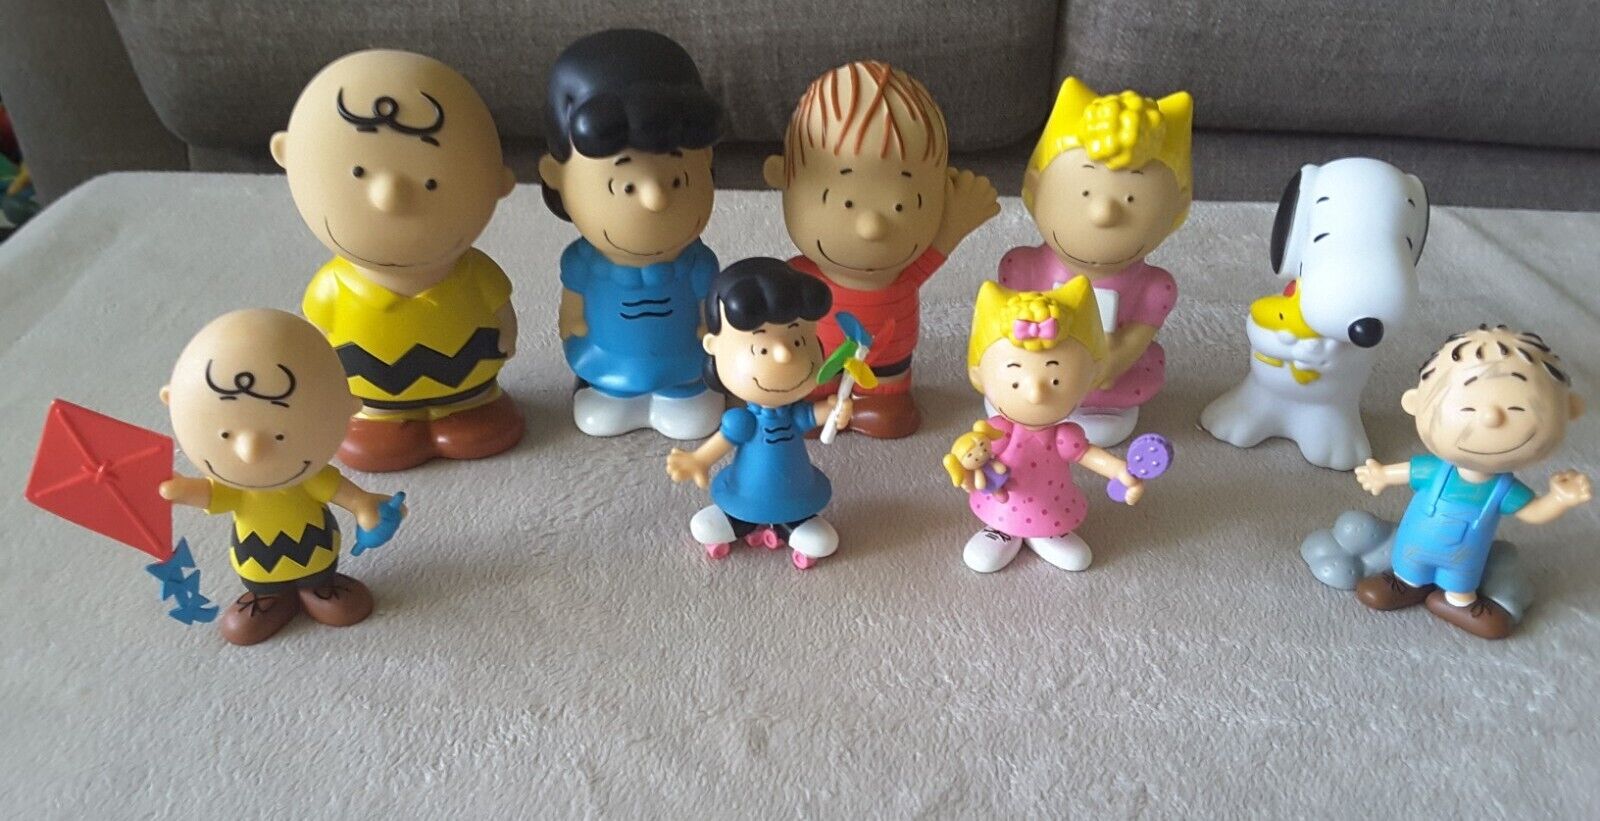 VINTAGE PEANUTS CHARLIE BROWN,LUCY,SNOOPY,SALLY,PIG PEN BATH & PVC FIGS.